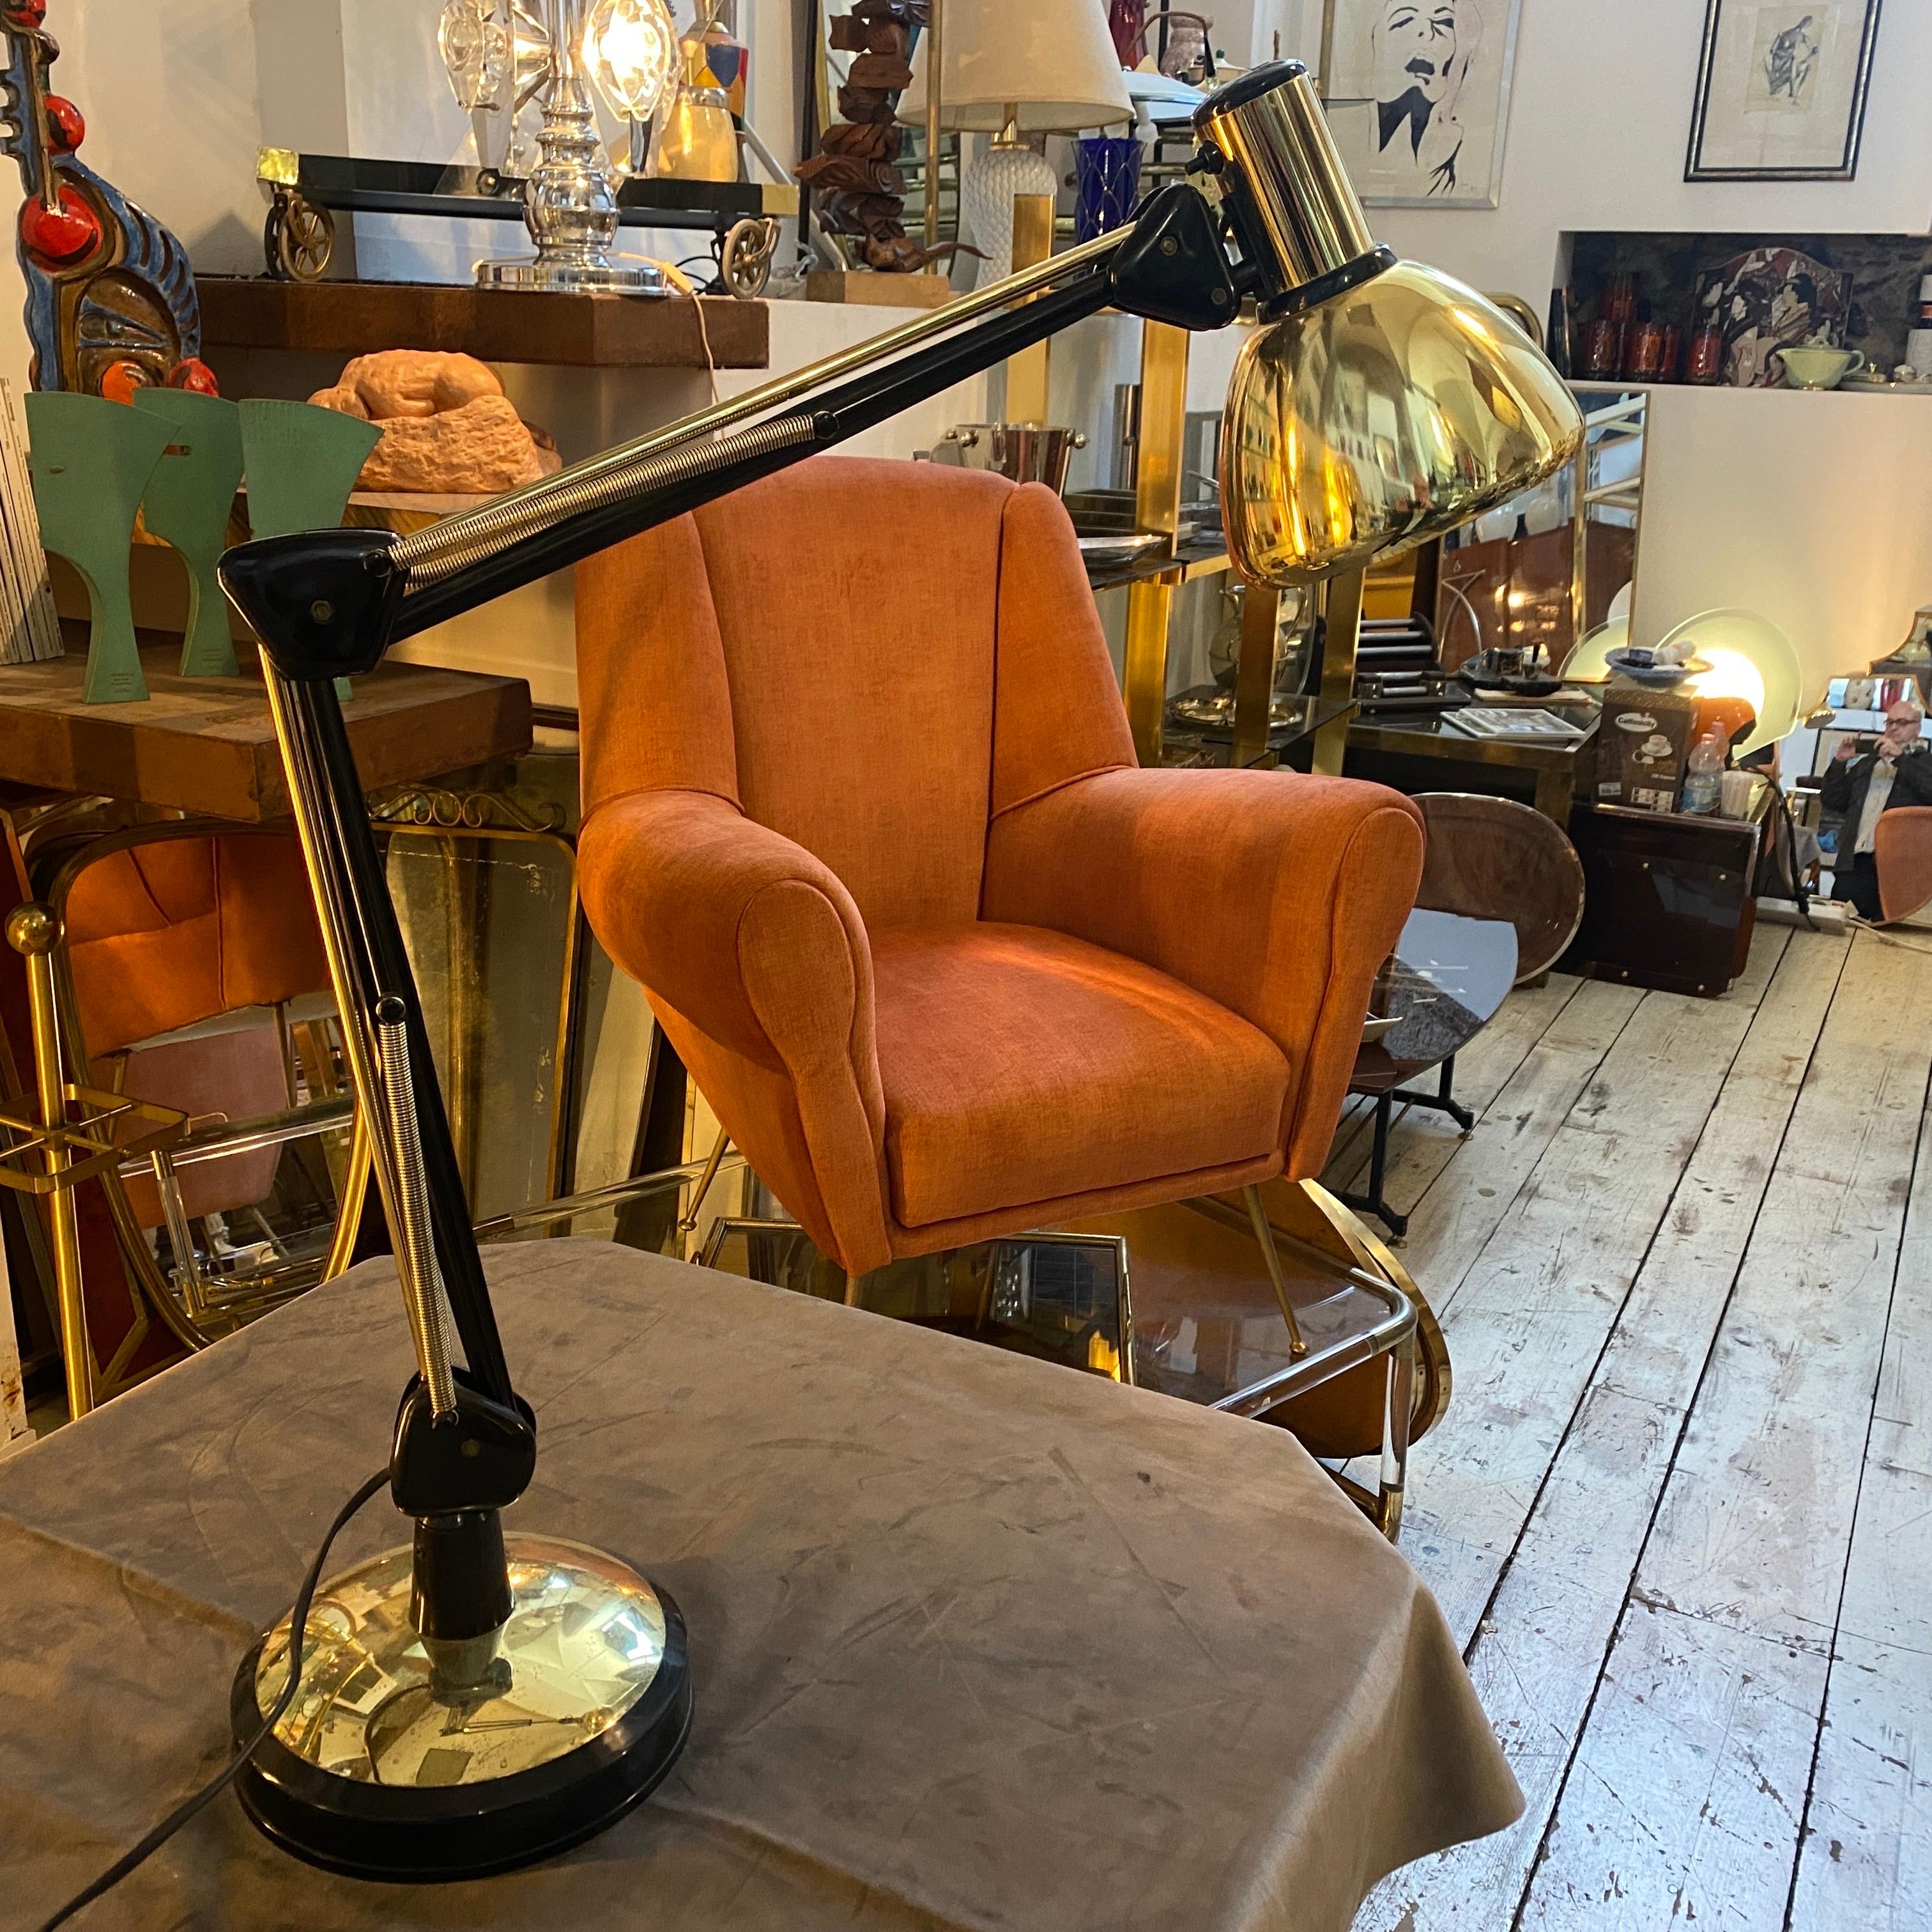 A gilt metal and plastic desk lamp designed and manufactured in Italy in the seventies in very good conditions overall. It's in working order. The desk lamp is a sleek and functional lighting fixture that embodies the design principles of the era.